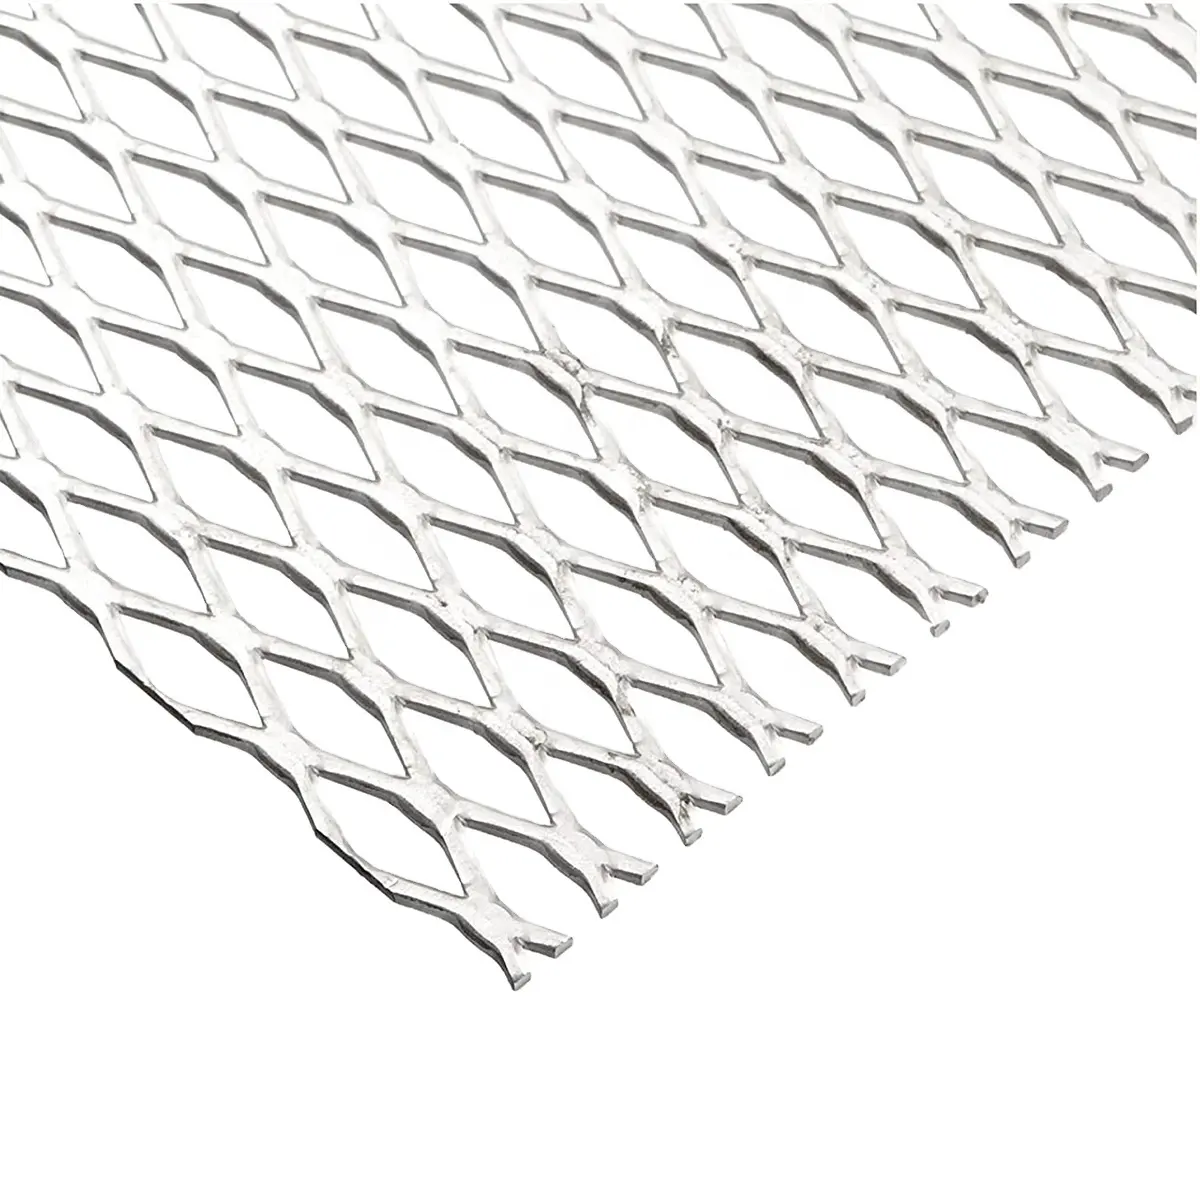 DIAMOND MESH gothic stainless steel expanded metal lath mesh price aluminum wire mesh/Expanded wire mesh Metal/steel sheet plate